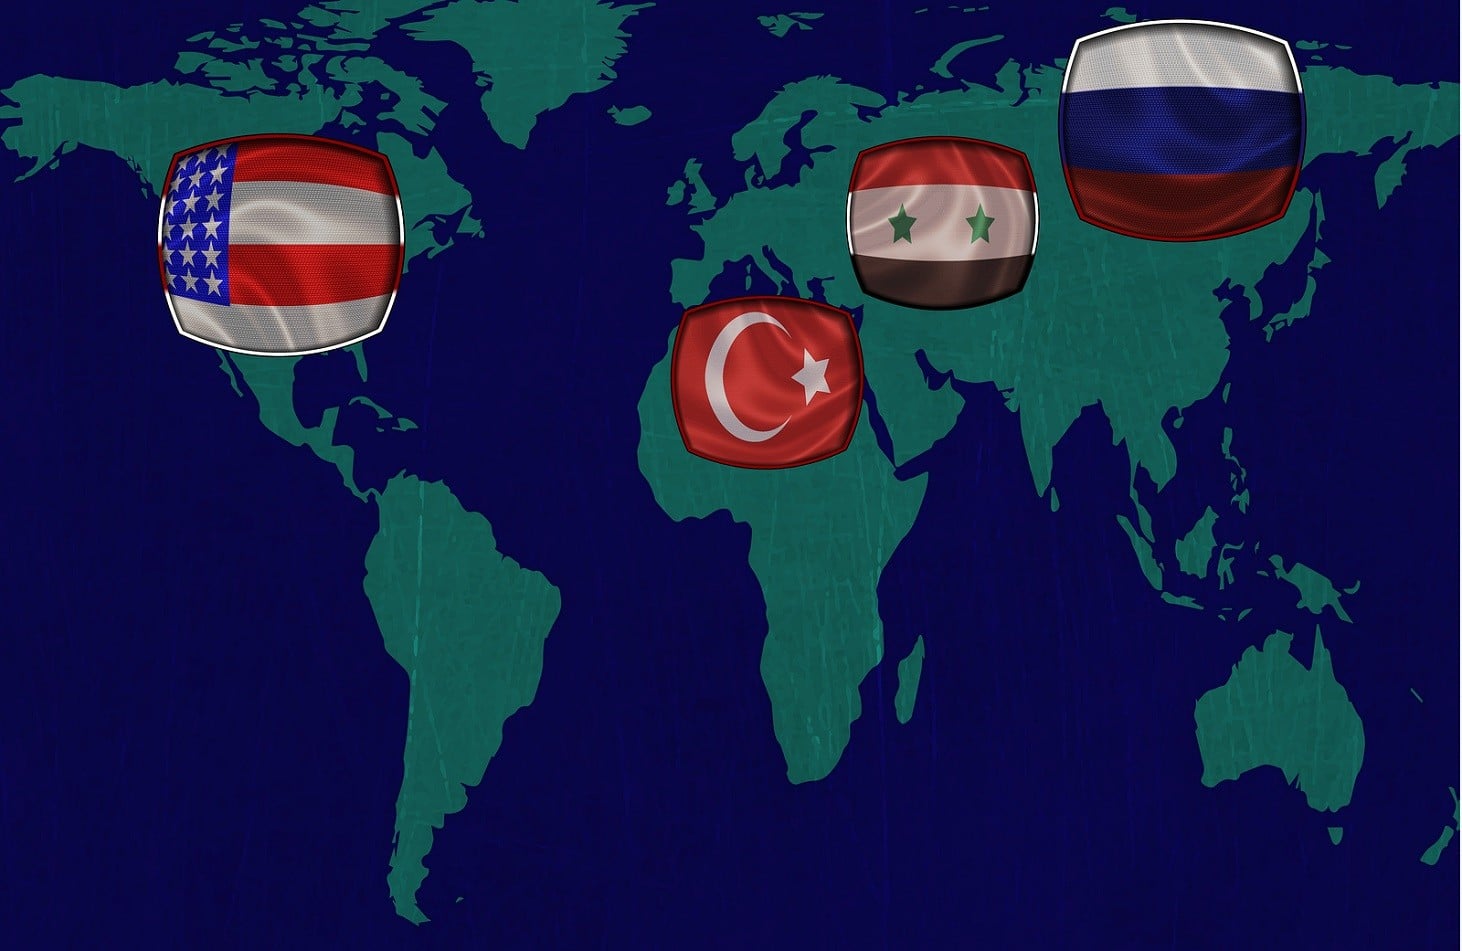 flags of Russia, Syria, United States, Turkey on world map